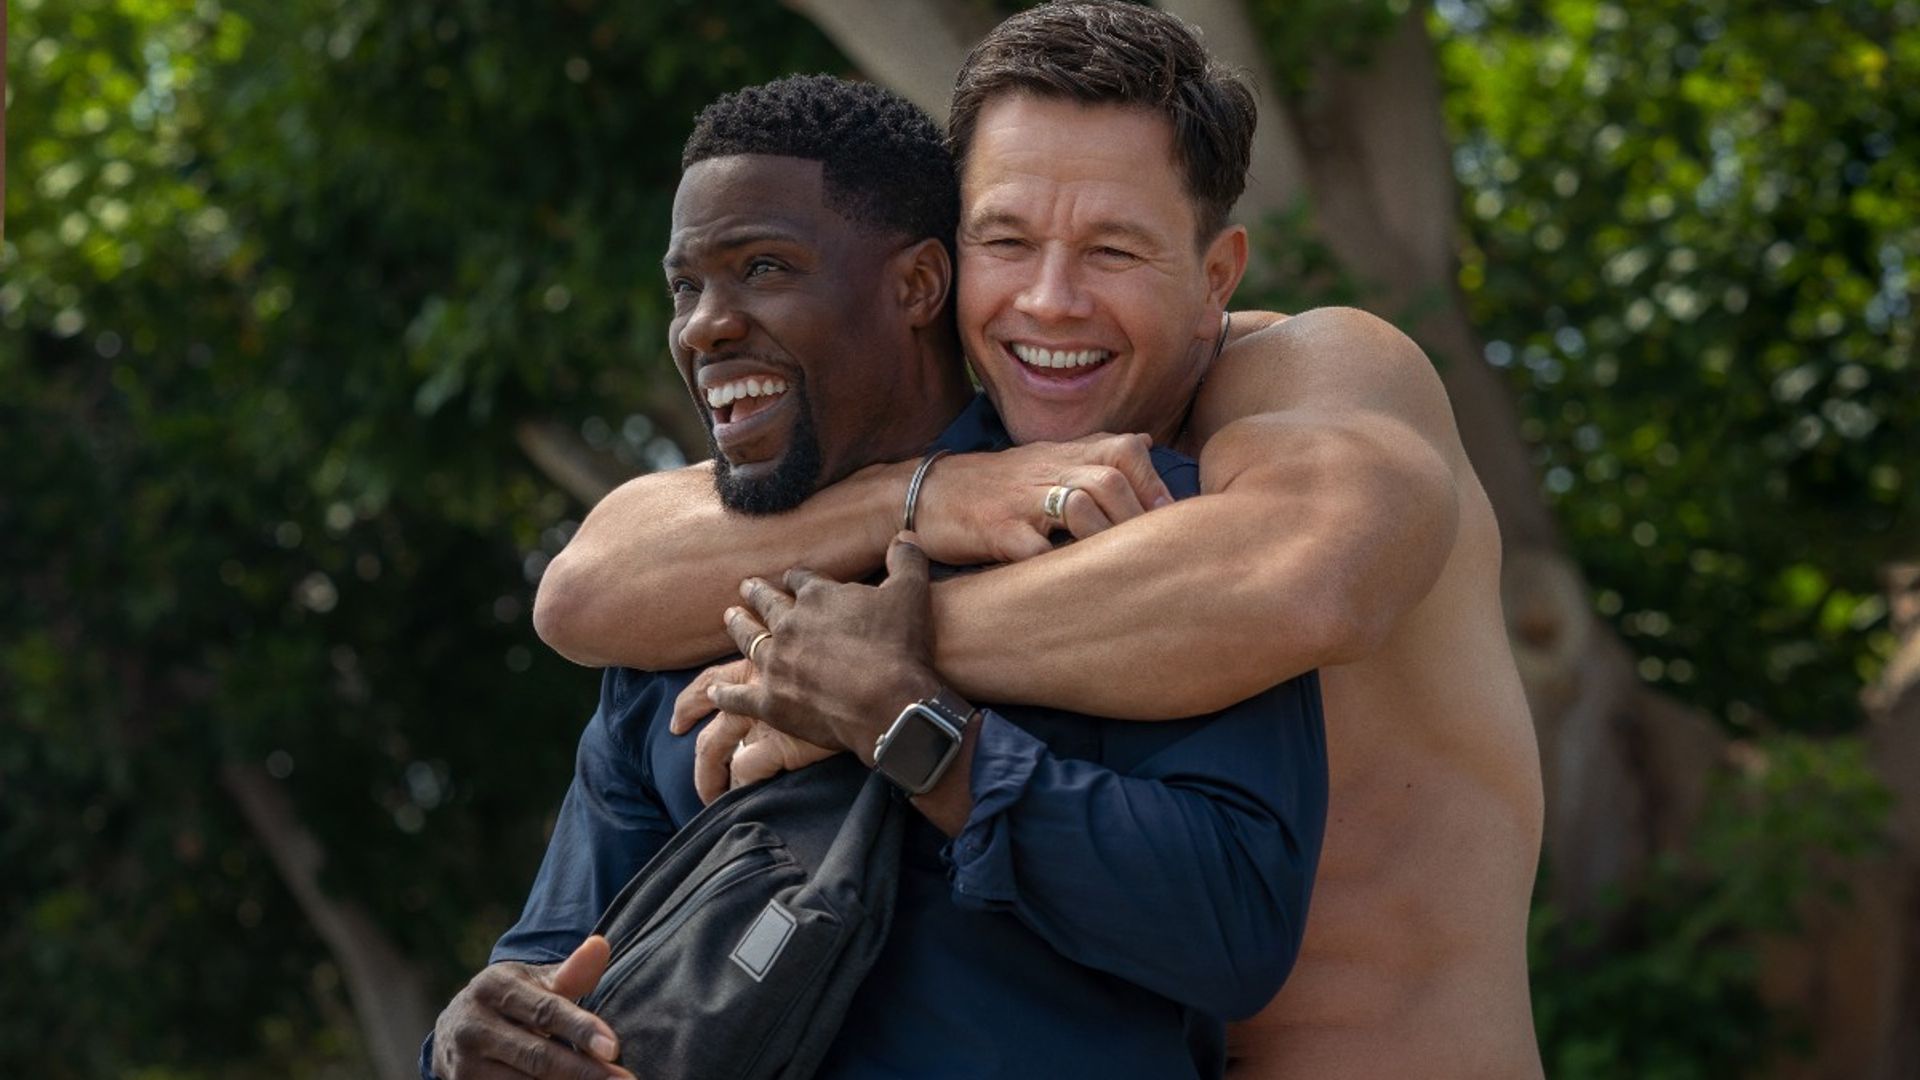 Netflix's Me Time: Viewers extremely divided over new Kevin Hart and Mark  Wahlberg film - here's why